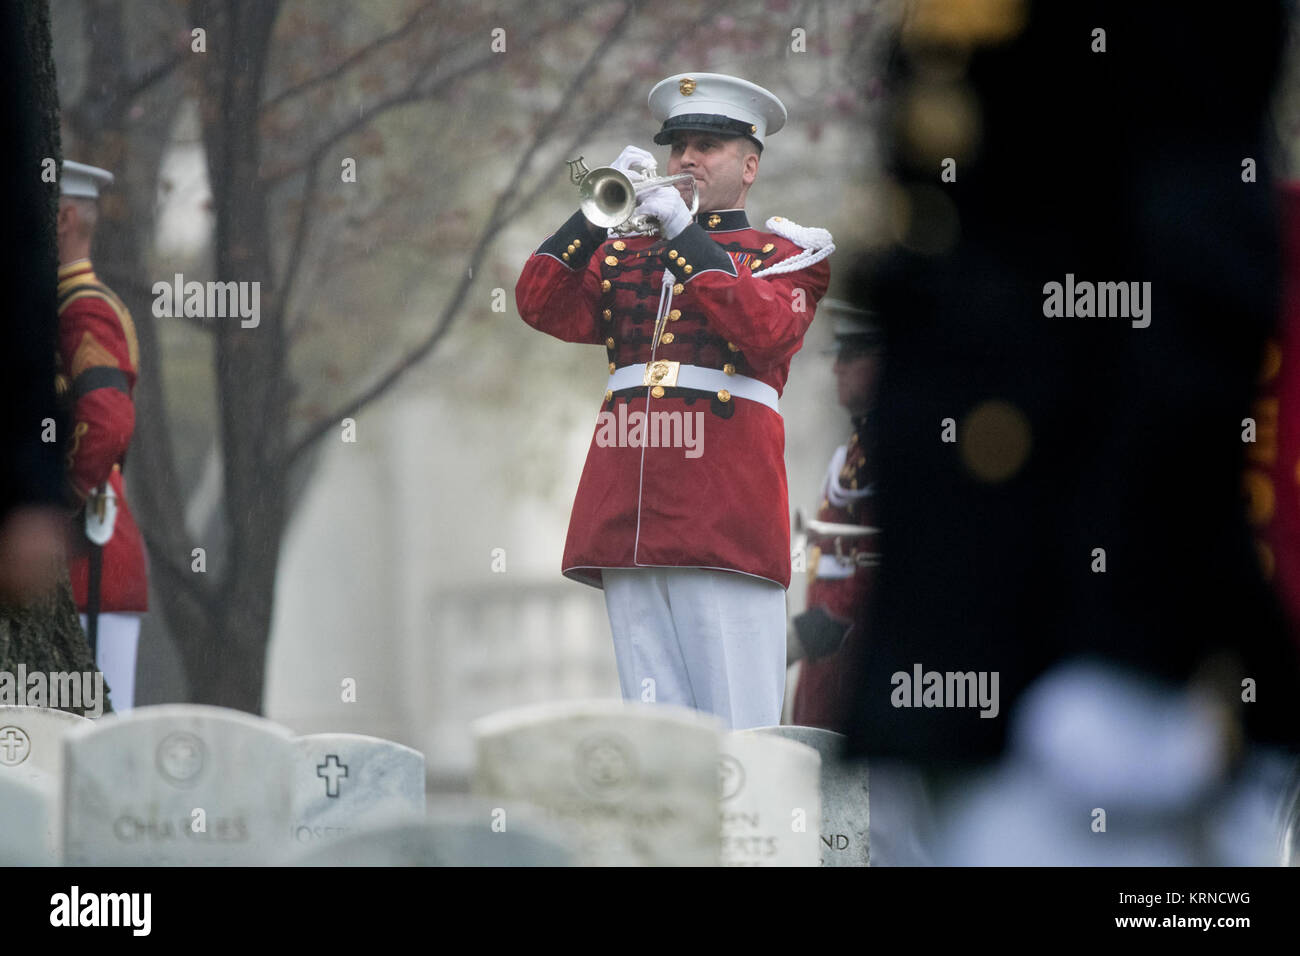 'Taps' is played during the funeral service for former astronaut and U.S. Senator John Glenn, who was buried with full military honors, at Arlington National Cemetery in Virginia on Thursday, April 6, 2017, the day on which he and his wife Annie were married in 1943. Glenn was the first American to orbit Earth on Feb. 20, 1962, in a five-hour flight aboard the Friendship 7 spacecraft. In 1998, he broke another record by returning to space at the age of 77 on the Space Shuttle Discovery. Photo Credit: (NASA/Aubrey Gemignani) John Glenn Interment (NHQ201704060012) Stock Photo